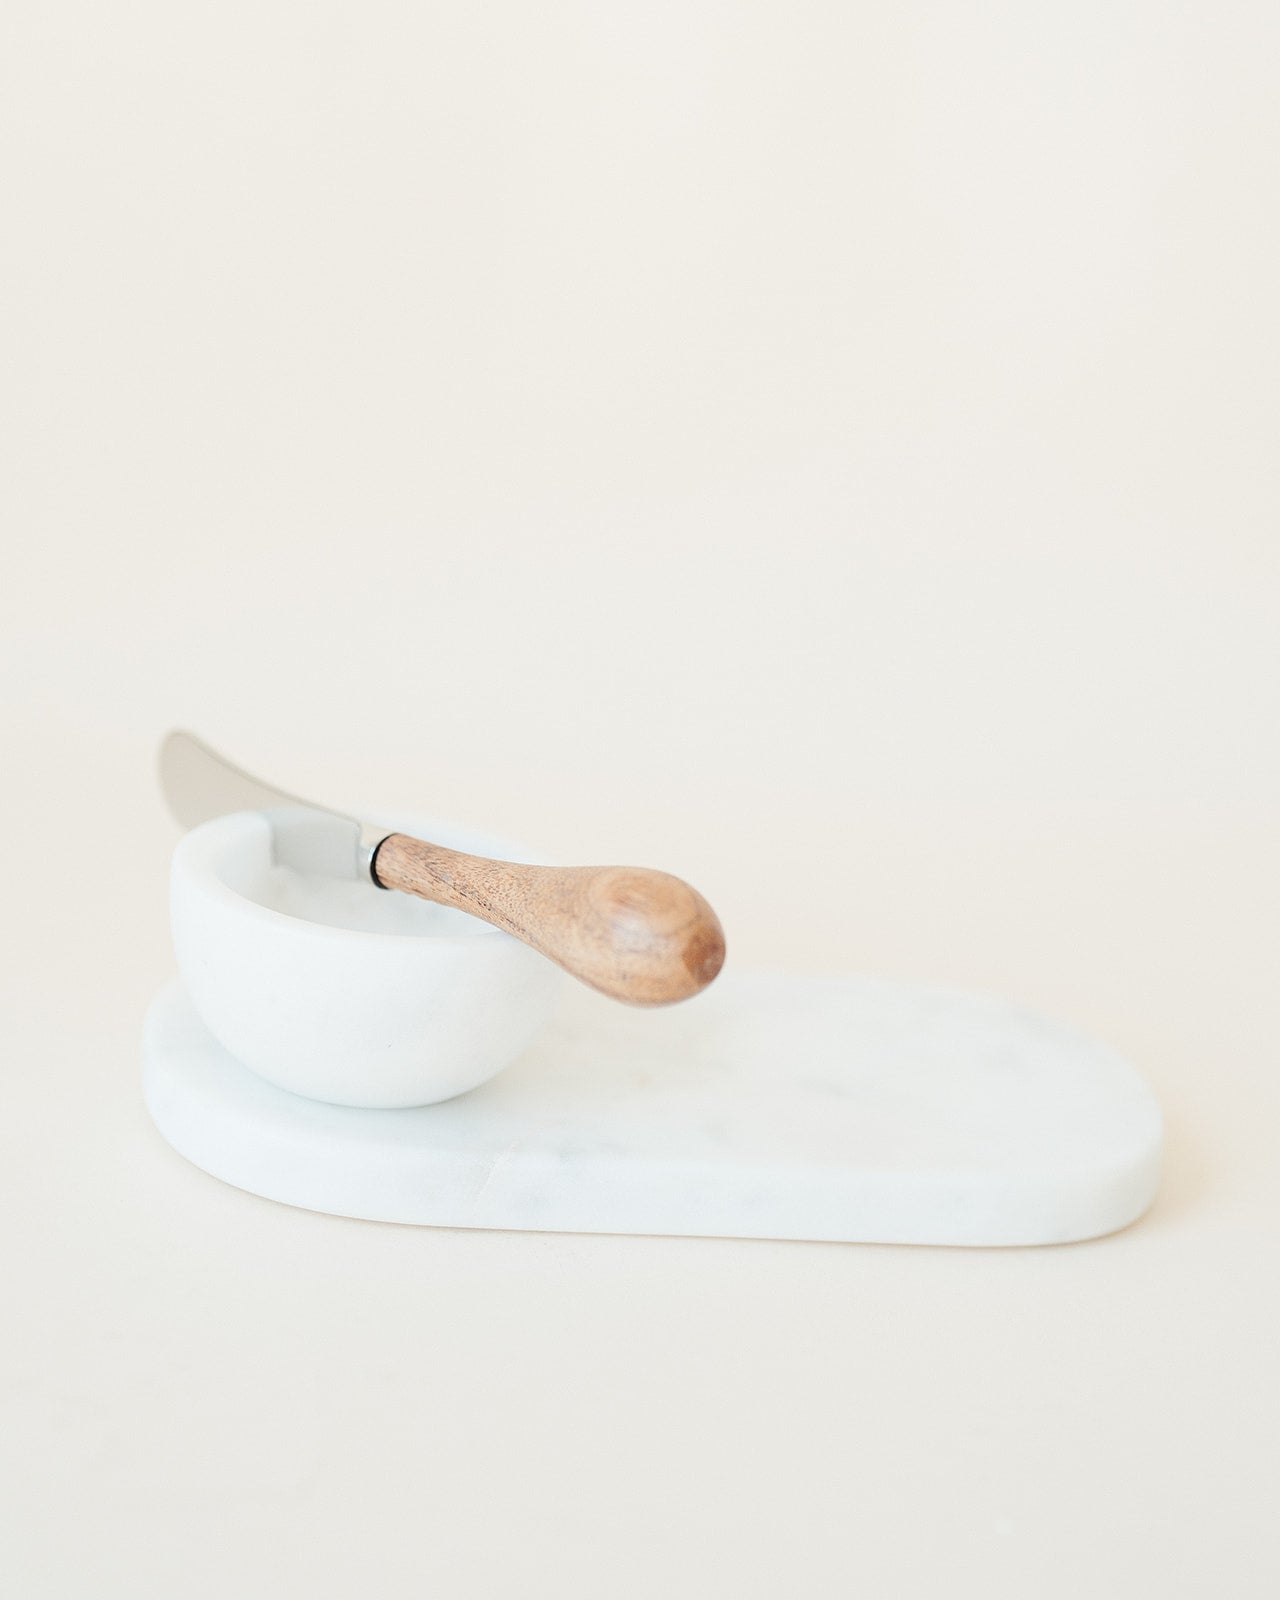 White Marble Serving Board with Knife